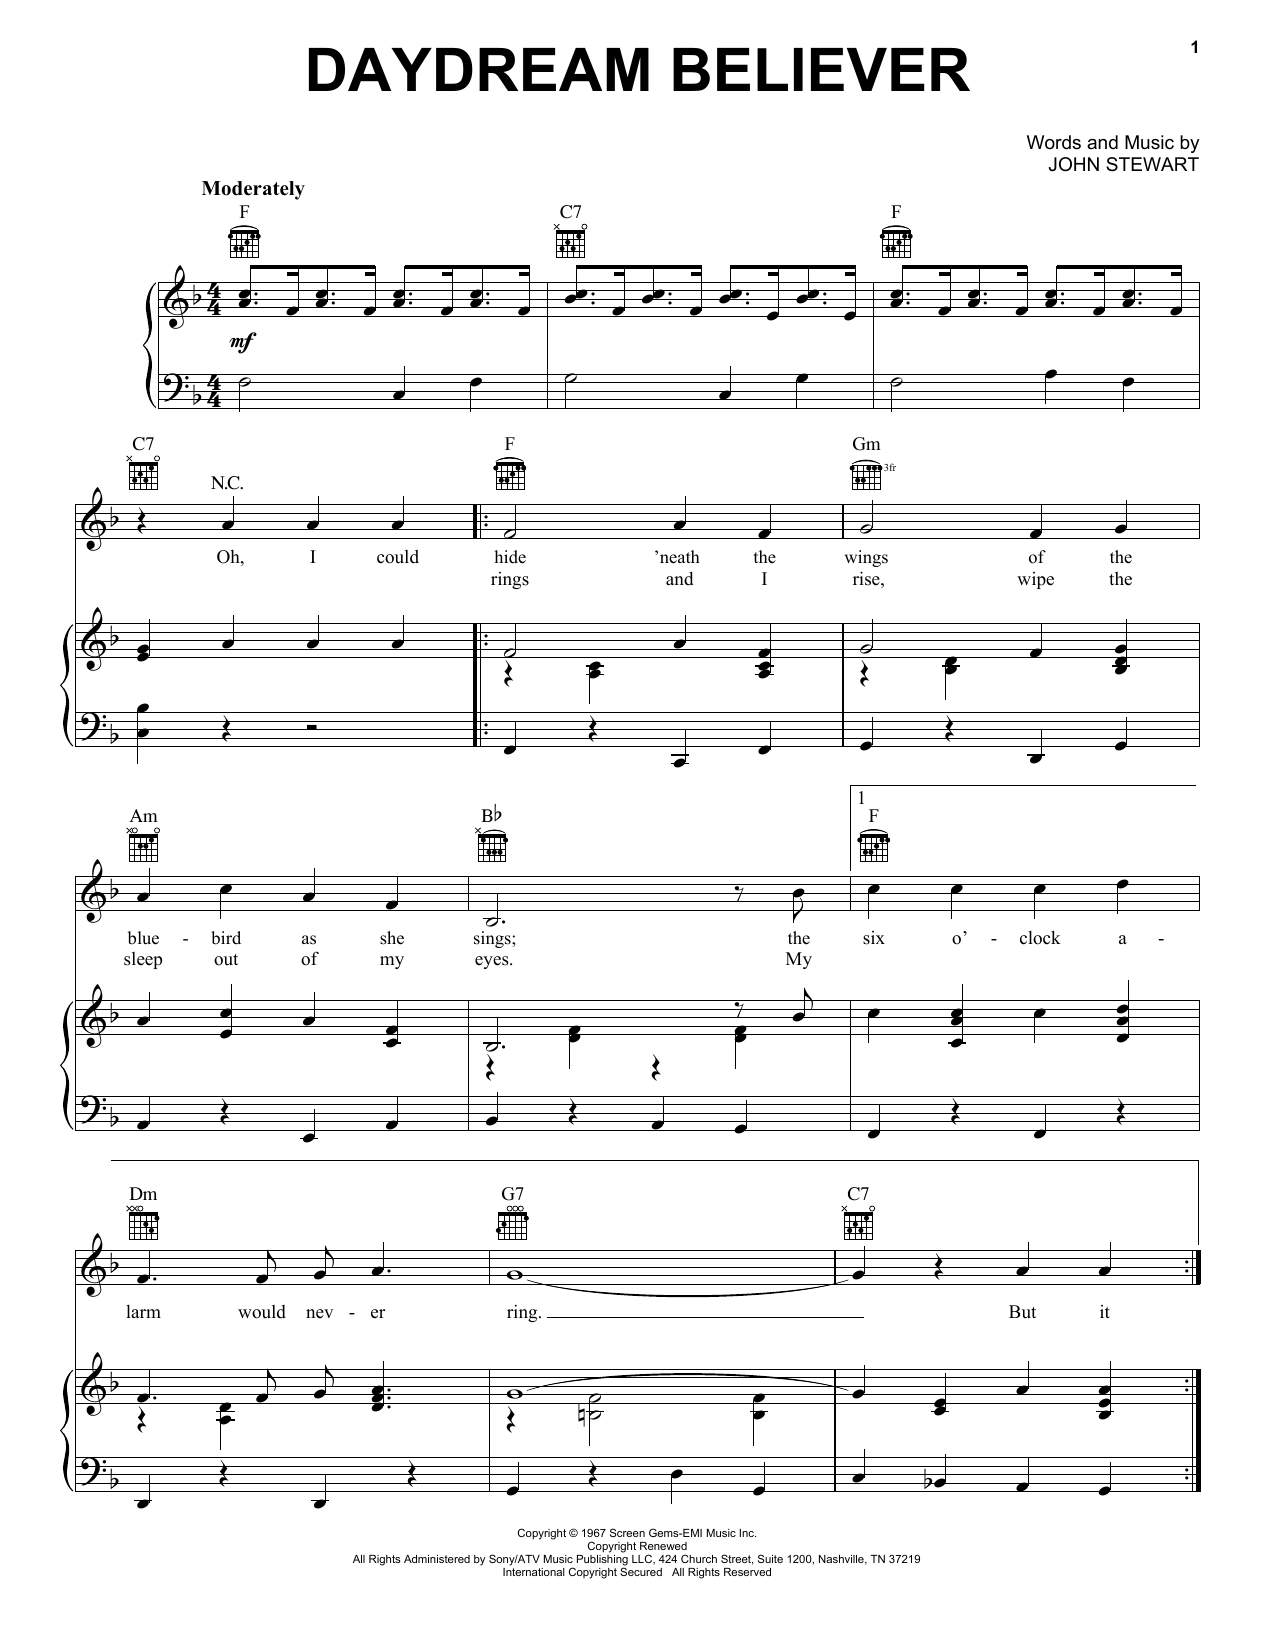 The Monkees Daydream Believer sheet music notes printable PDF score